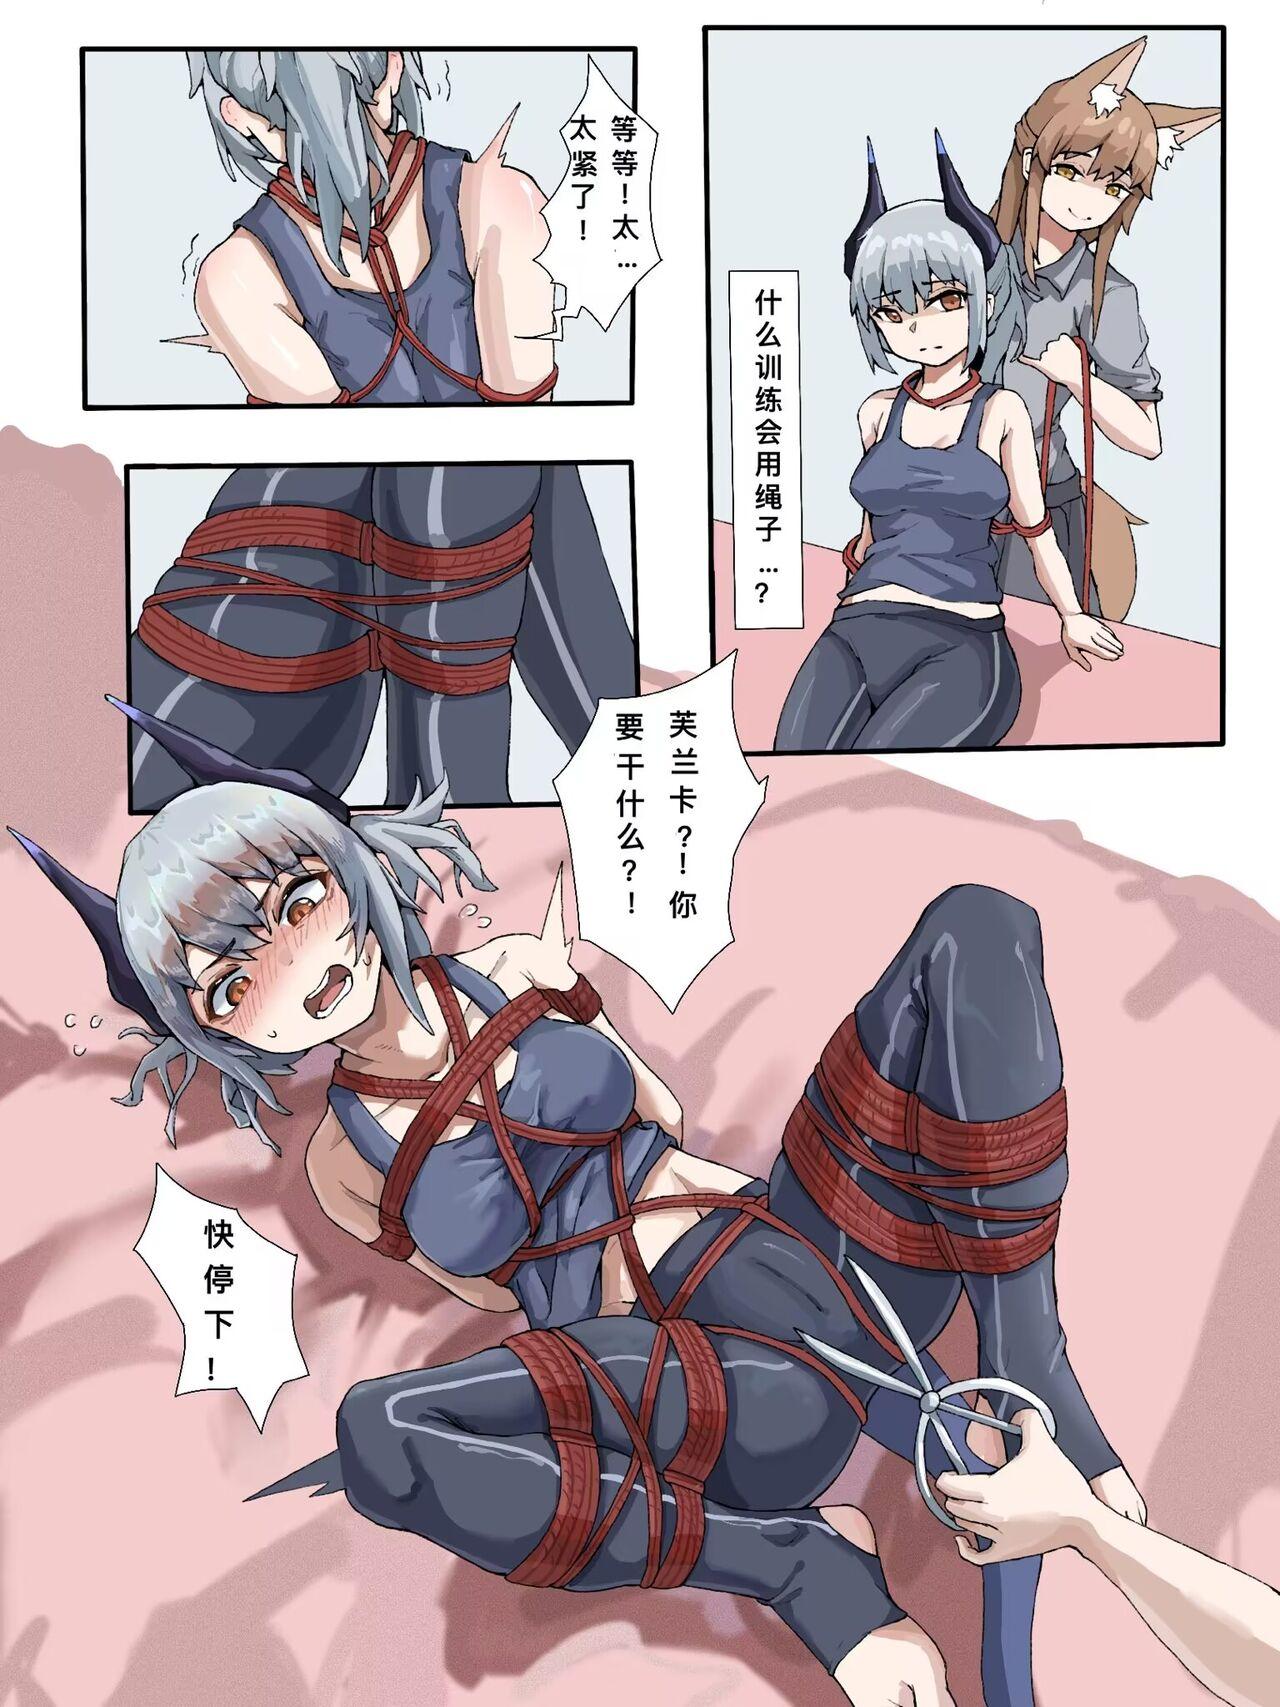 Gaydudes 雷蛇和弗兰卡的紧缚逃脱练习（迫真） - Arknights Costume - Picture 2